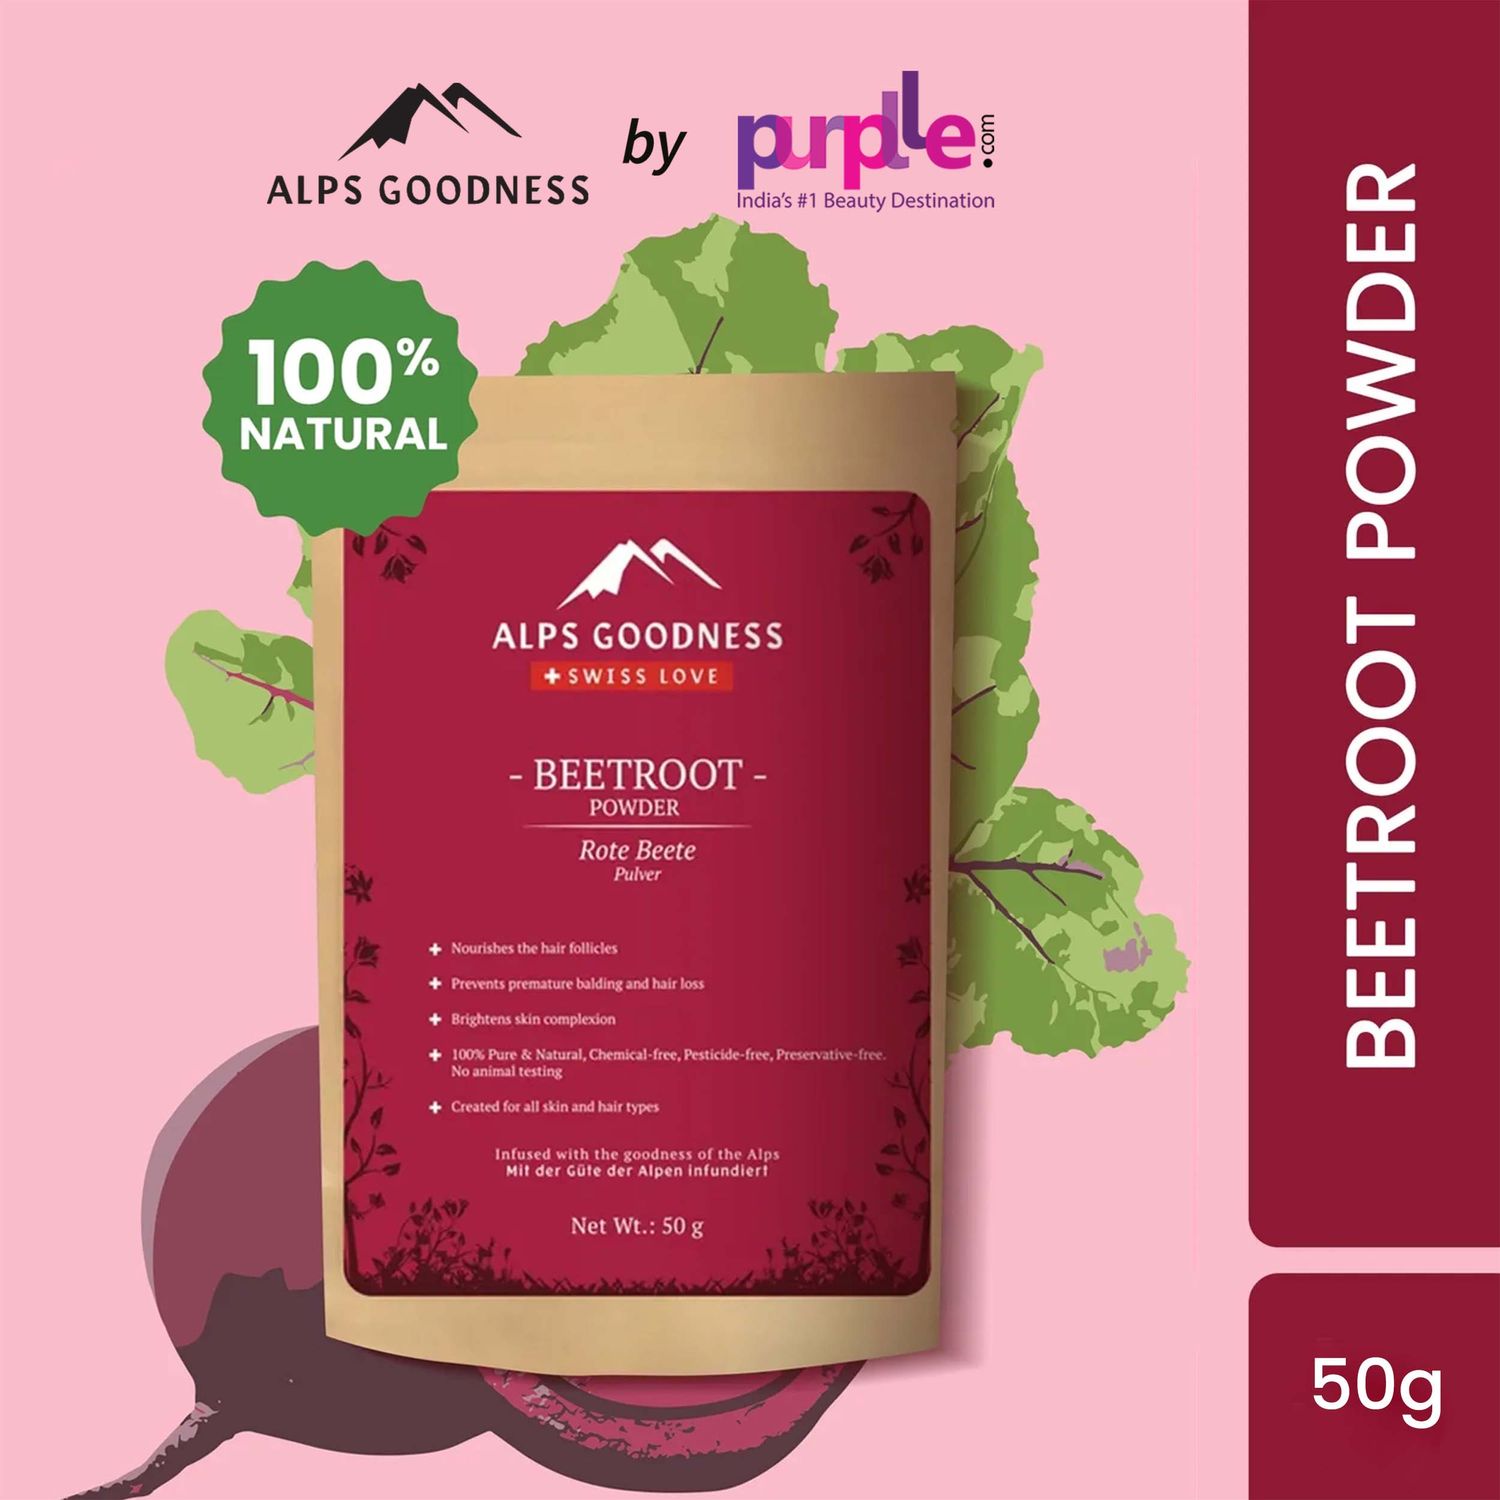 Buy Alps Goodness Powder - Beetroot (50 g)| 100% Natural Powder | No Chemicals, No Preservatives, No Pesticides | Can be used for Hair Mask and Face Mask | Nourishes hair follicles| Face Pack for brightening skin complexion | Hair Spa - Purplle